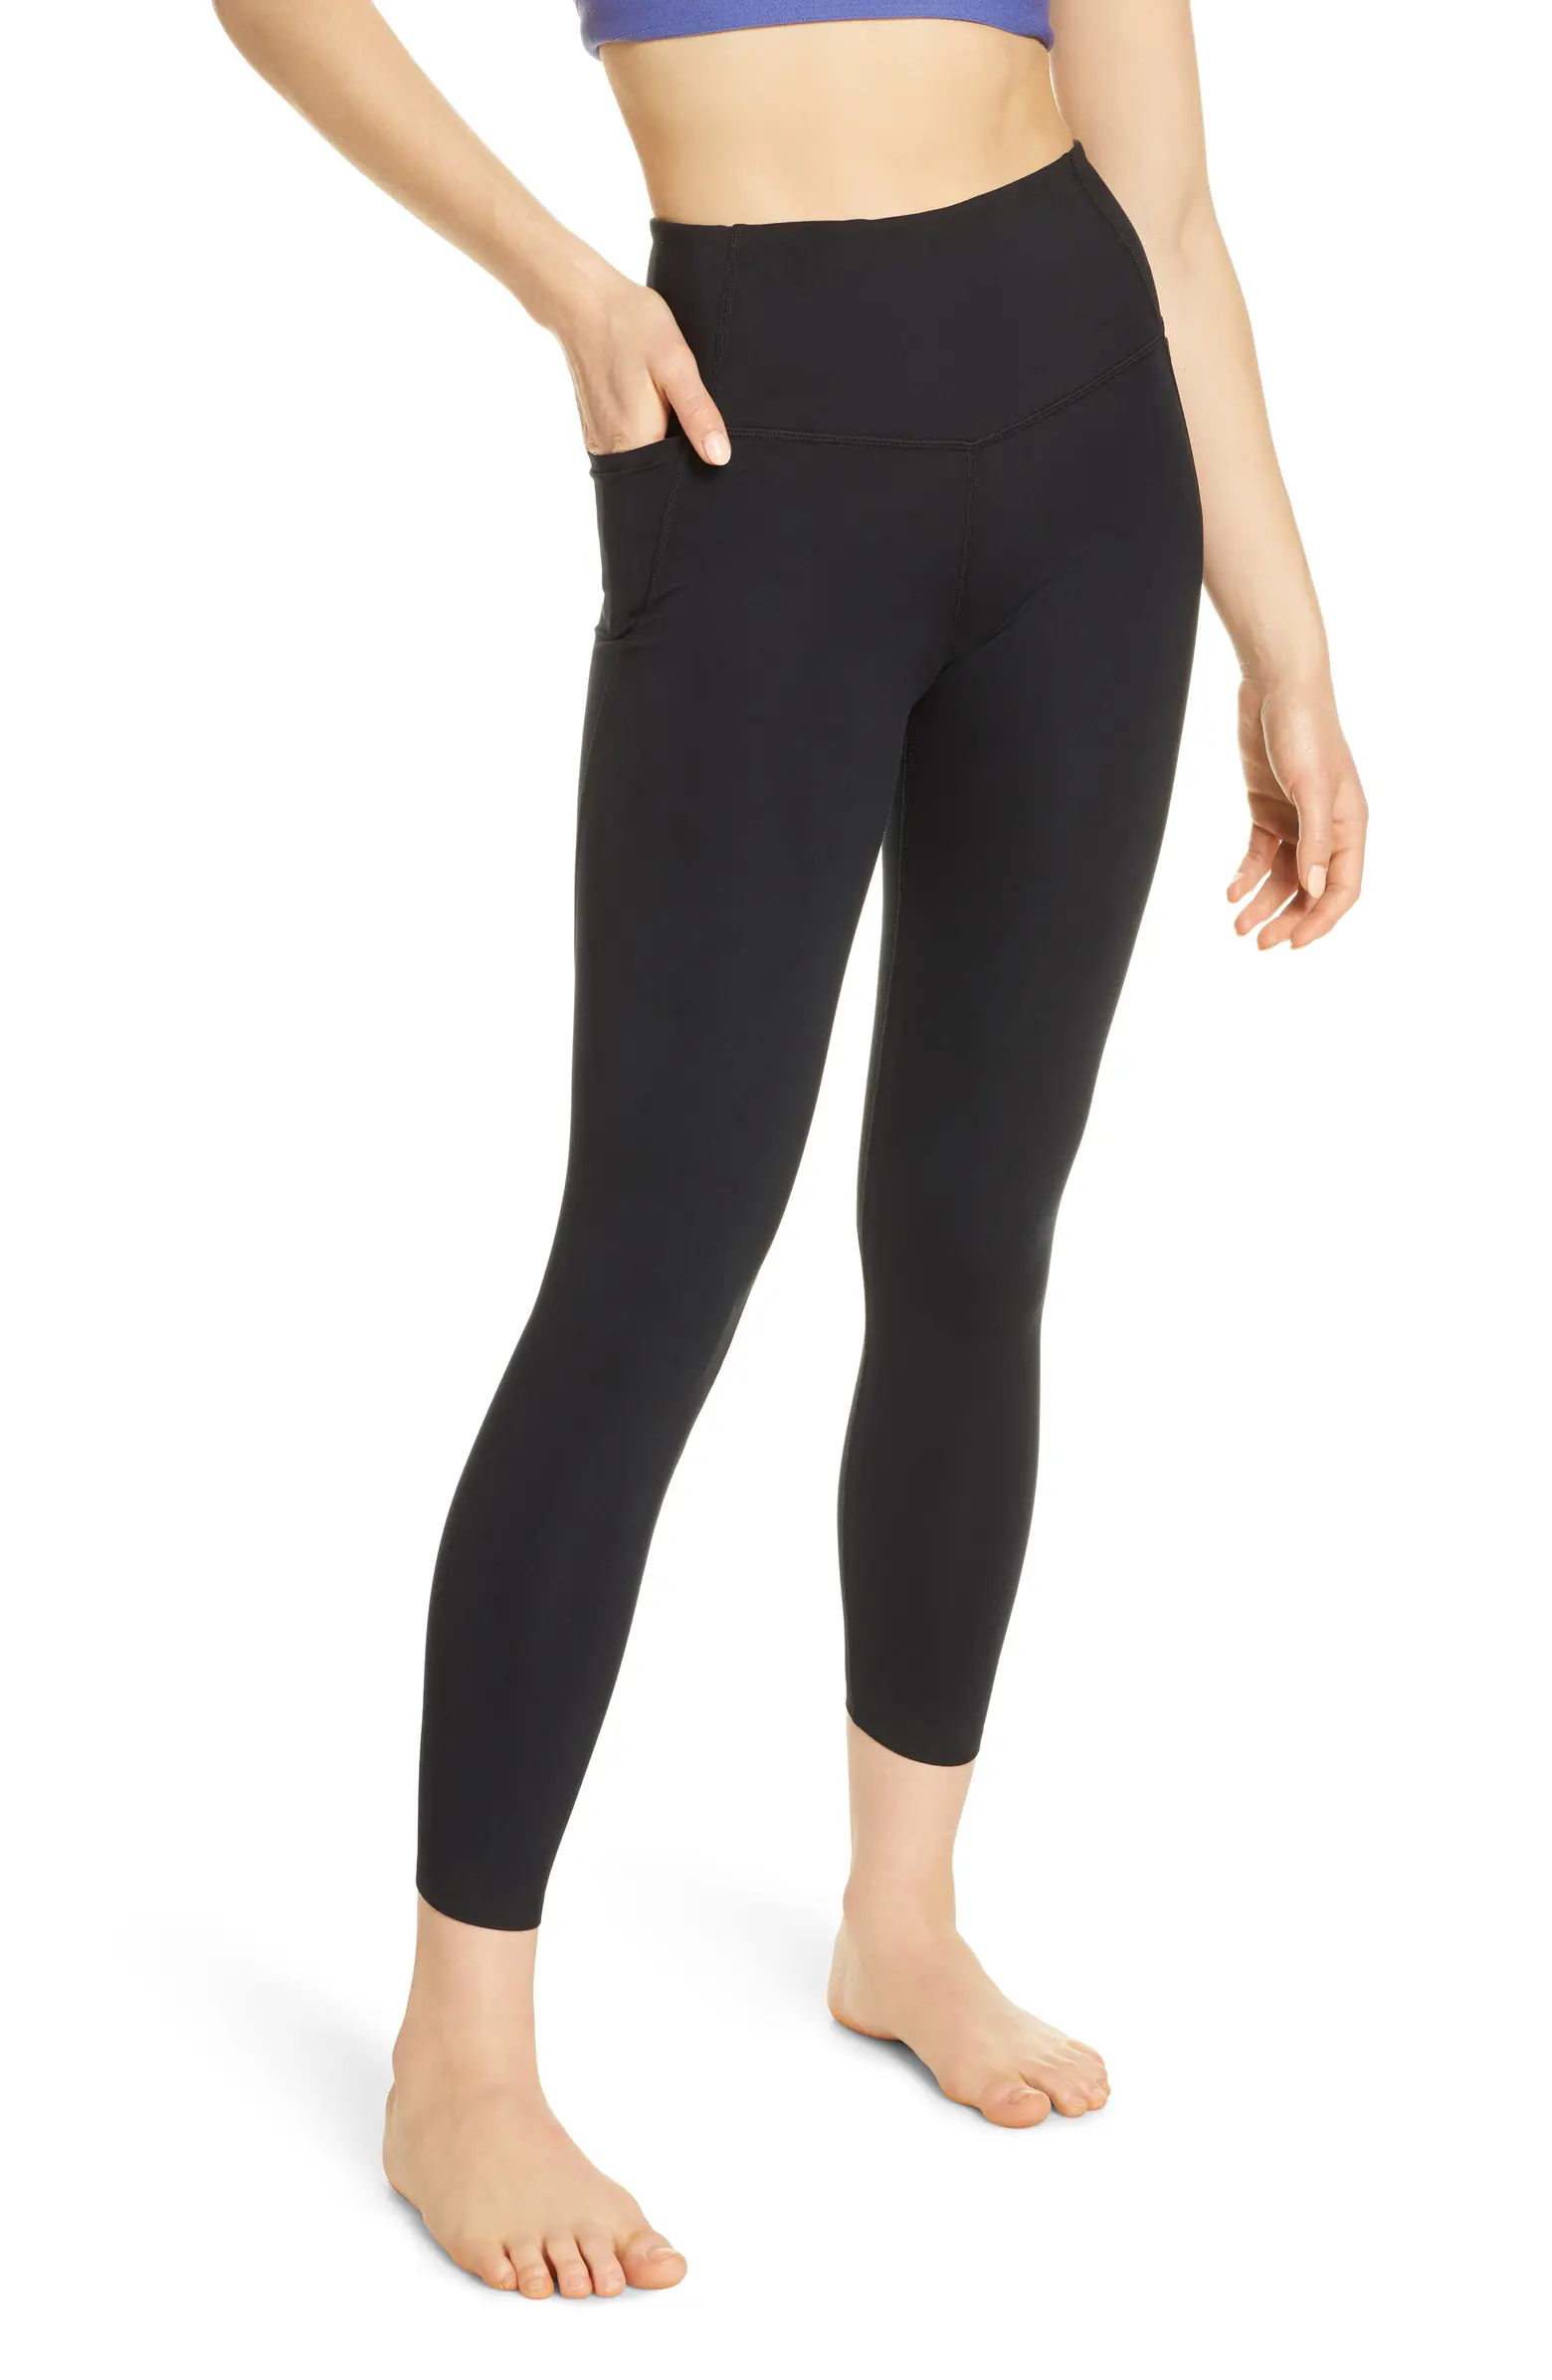 Details about   Women Yoga Pants Push Up Leggings Pocket Fitness Sports Gym Run Stretch Trousers 